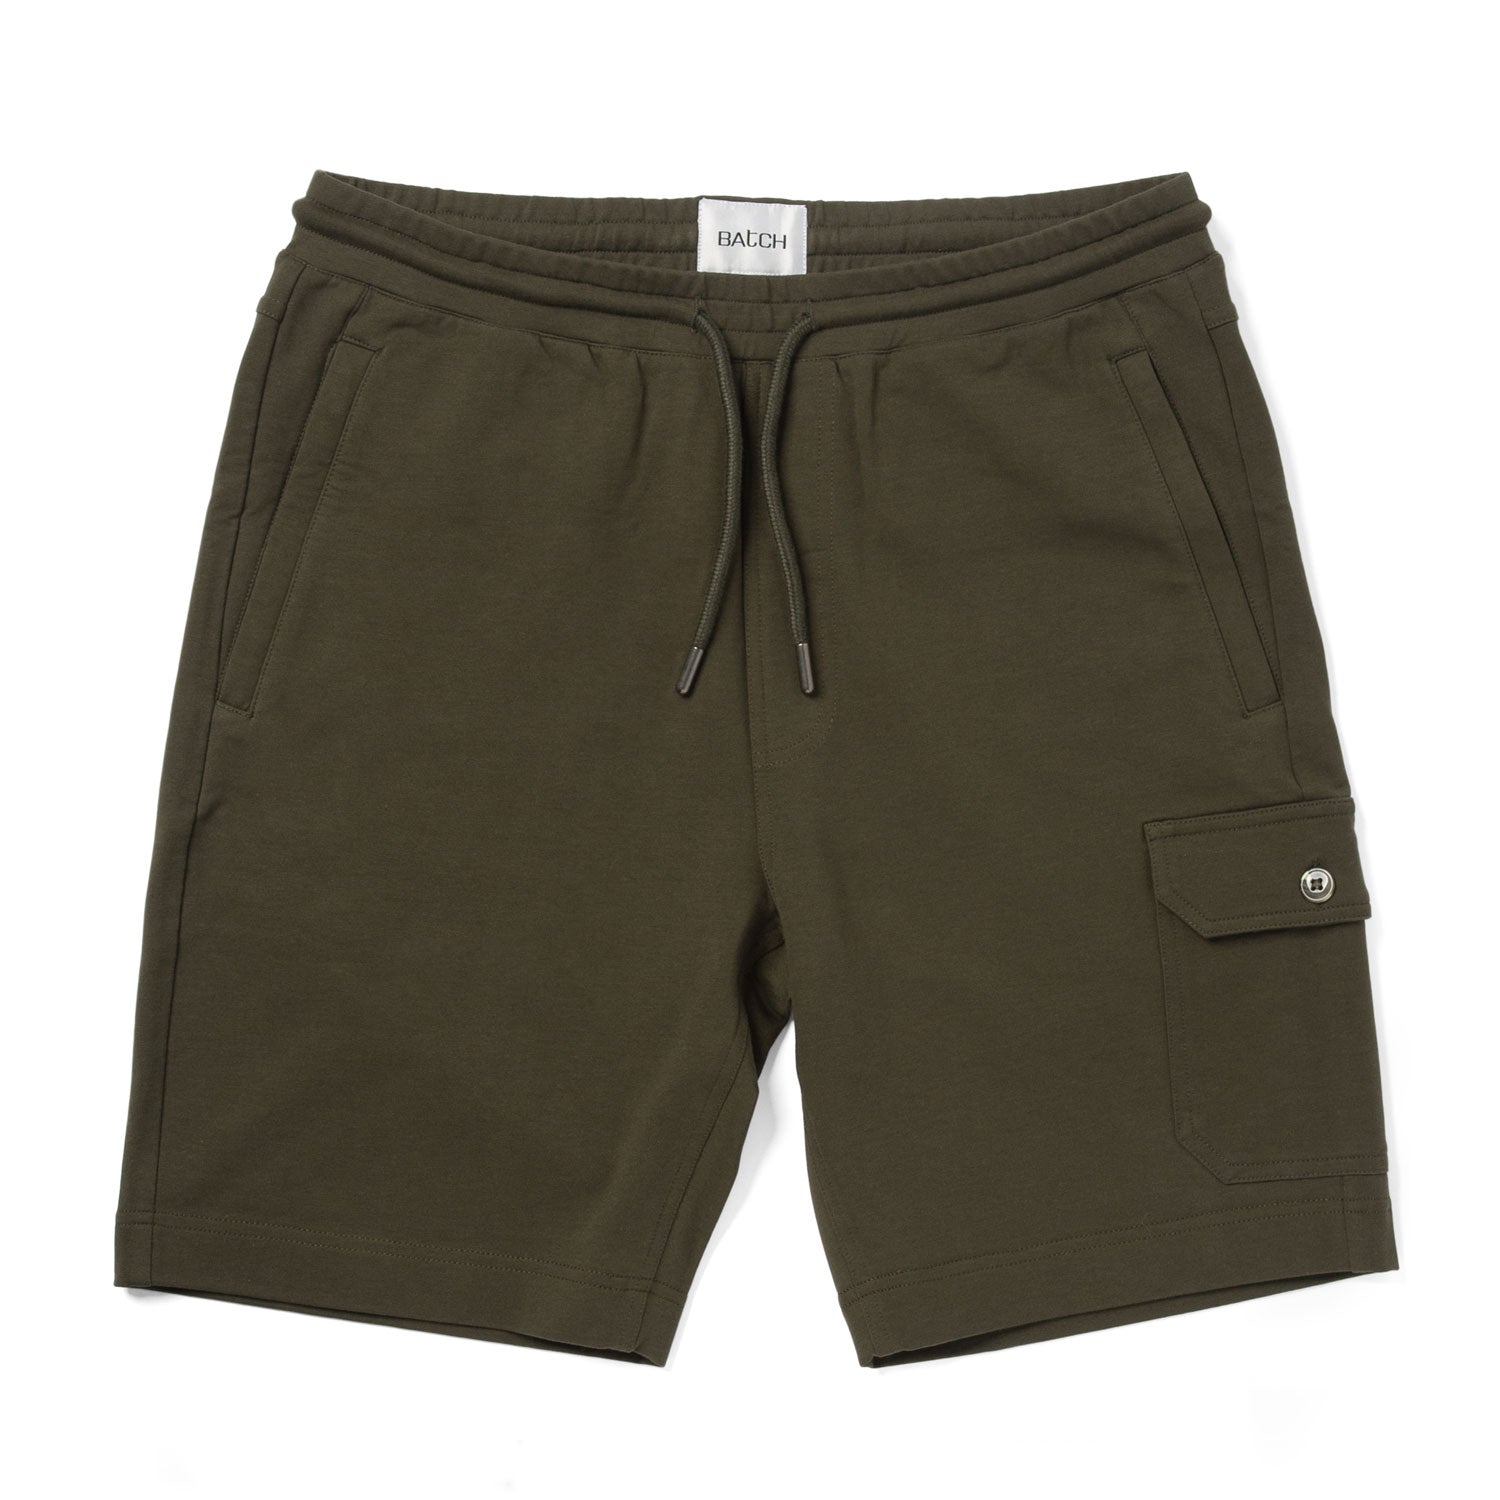 Constructor Short - Olive Green French Terry